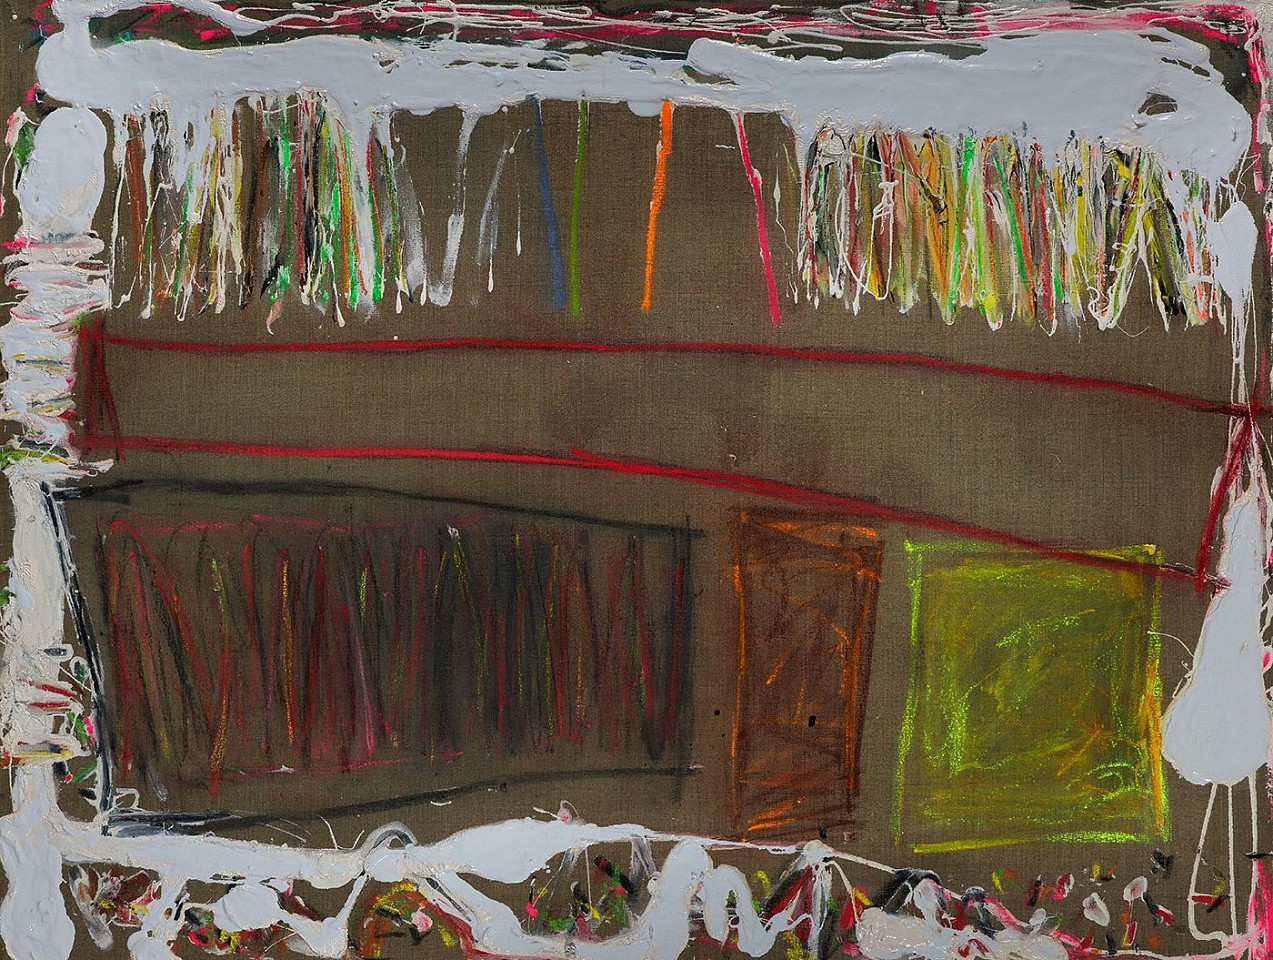 Joyce Weinstein, Country Fields with First Hint of Spring, 2014
Oil and mixed media on linen, 30 x 40 in. (76.2 x 101.6 cm)
WEI-00019